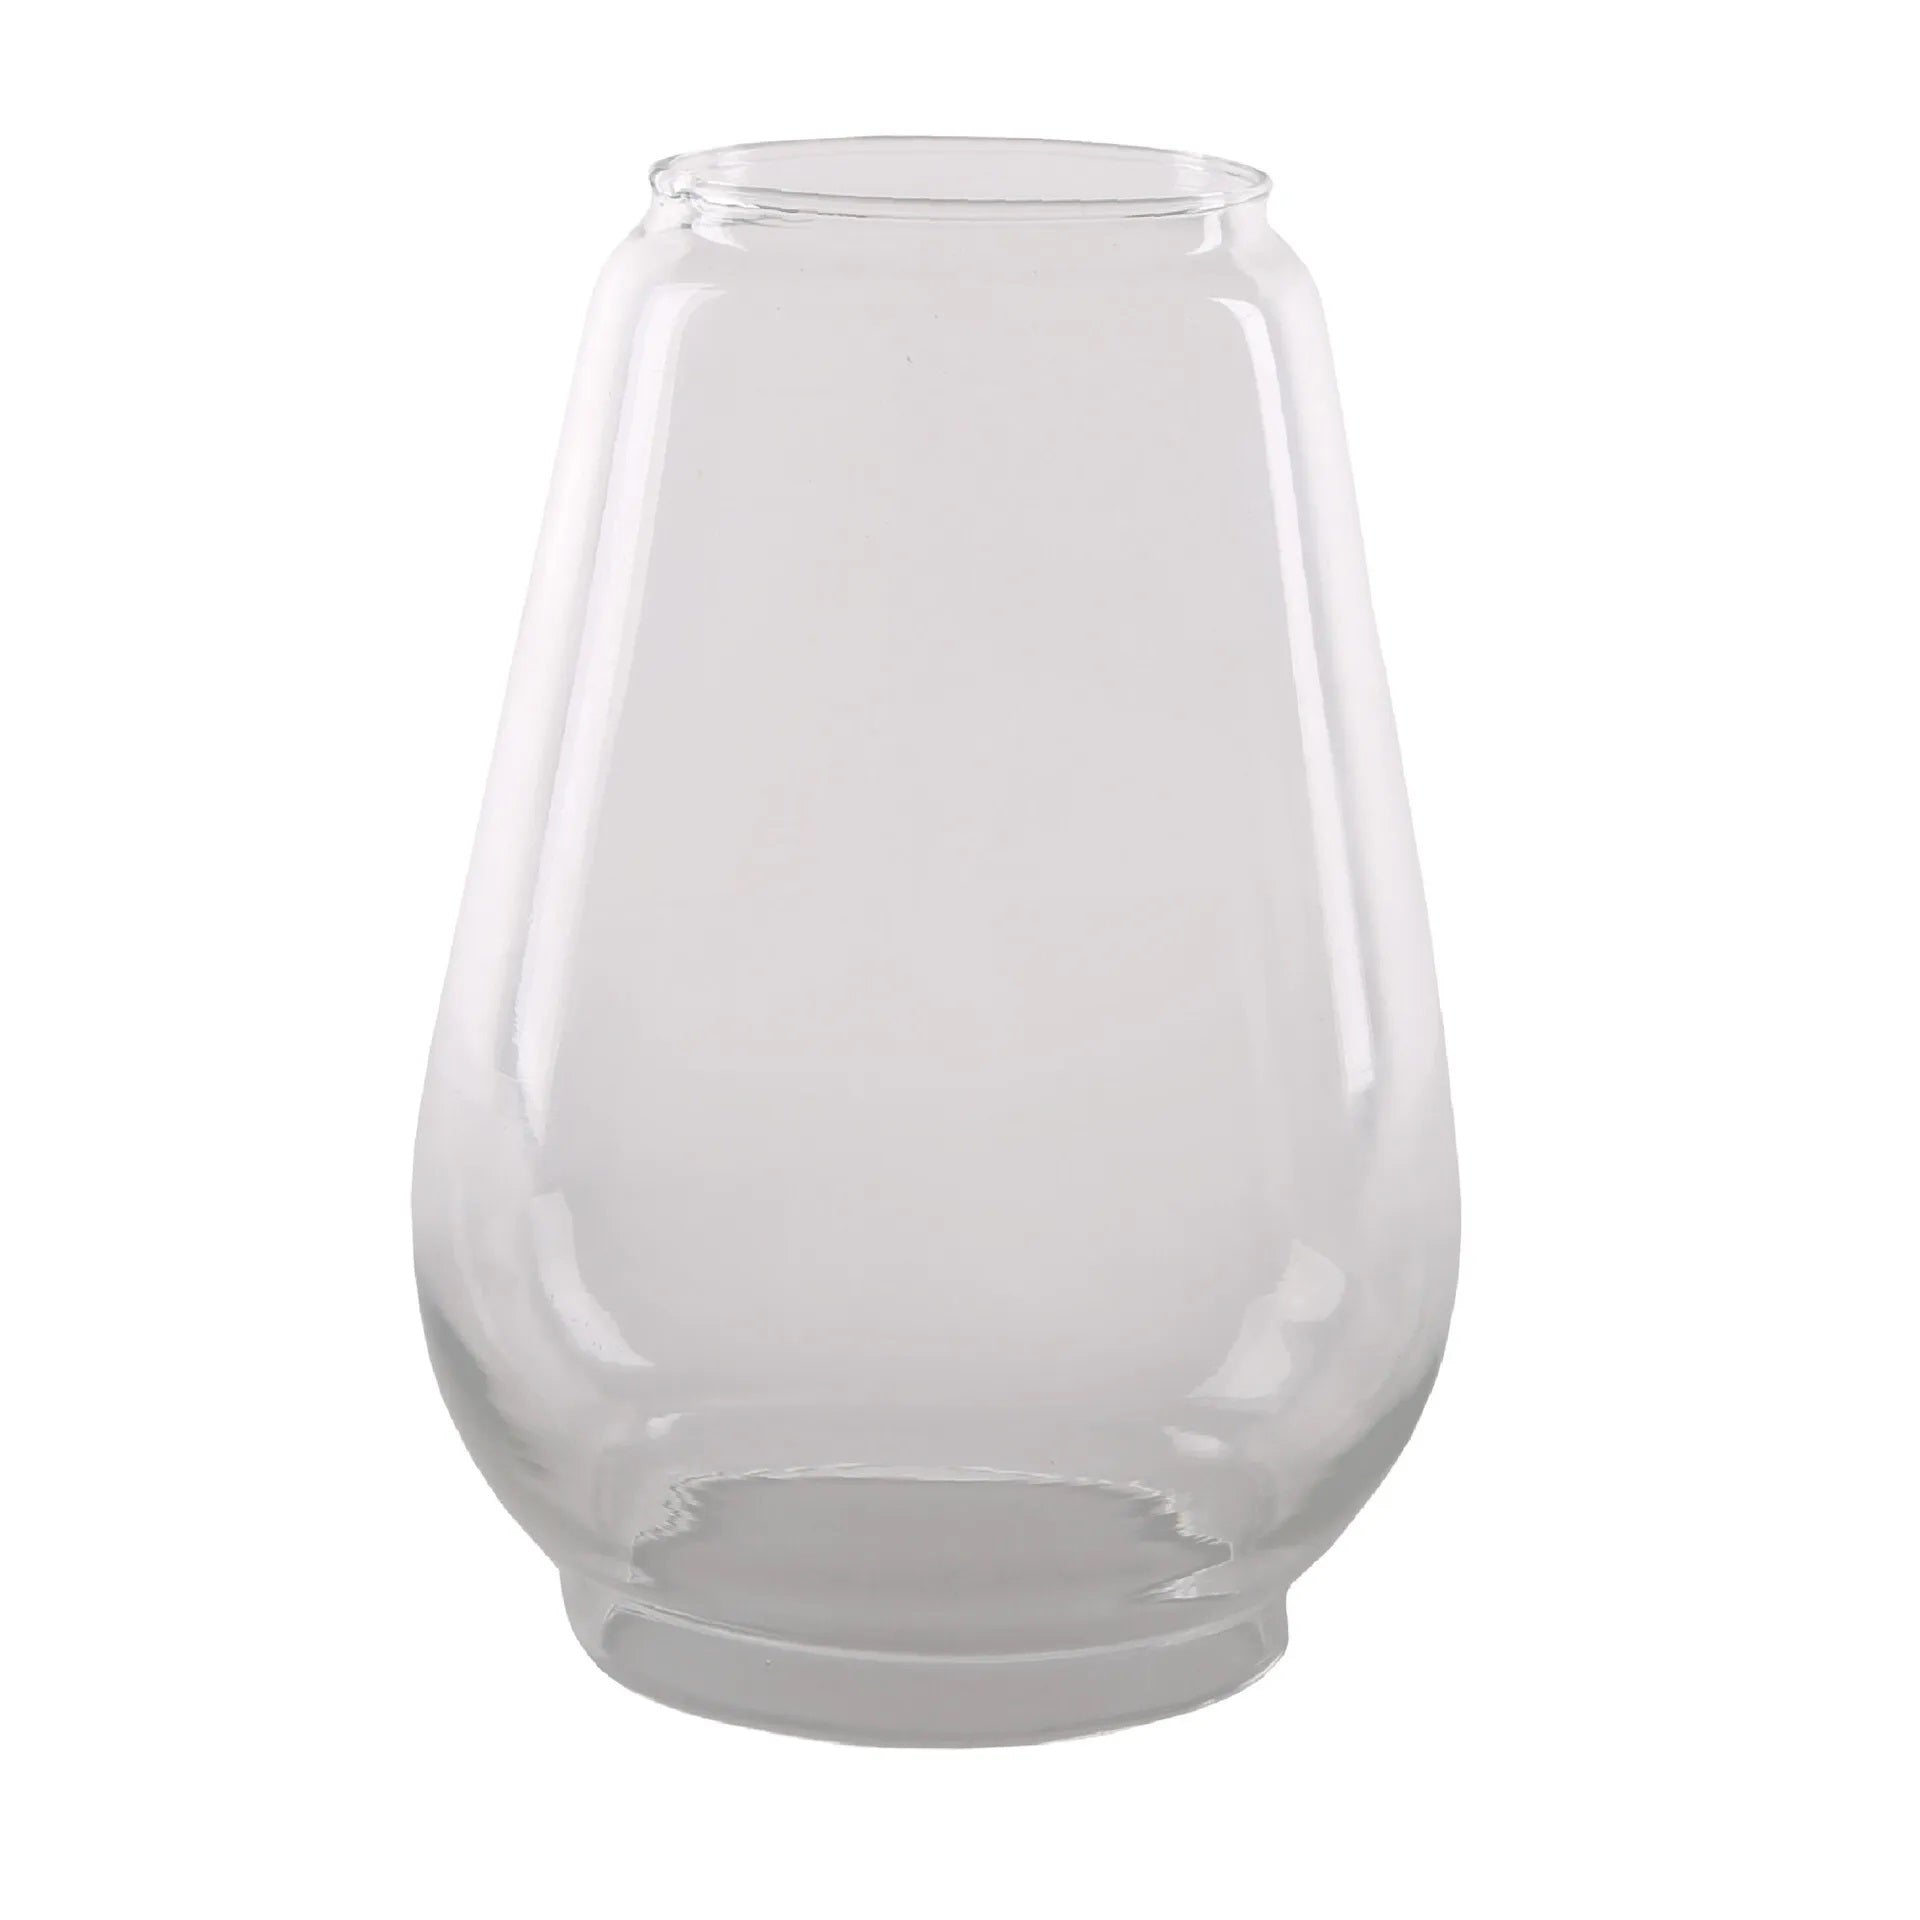 REPLACEMENT GLASS GLOBES FOR #127-eSafety Supplies, Inc